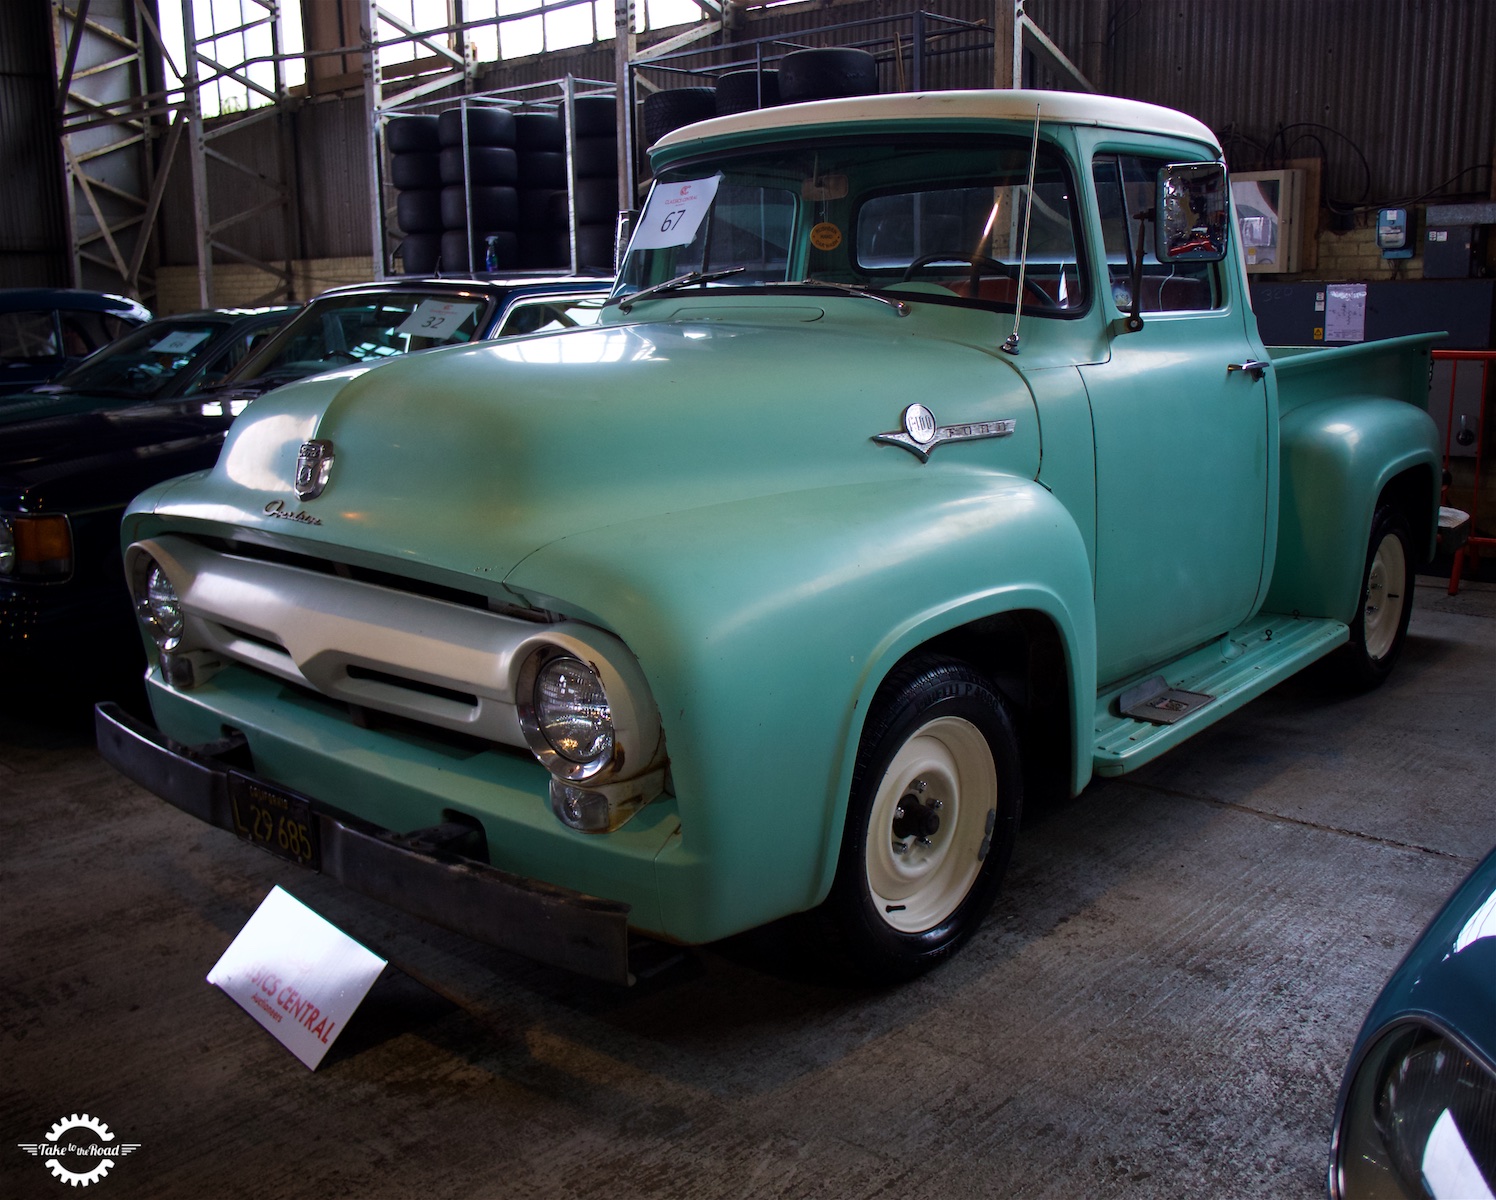 Choosing the right classic car to restore